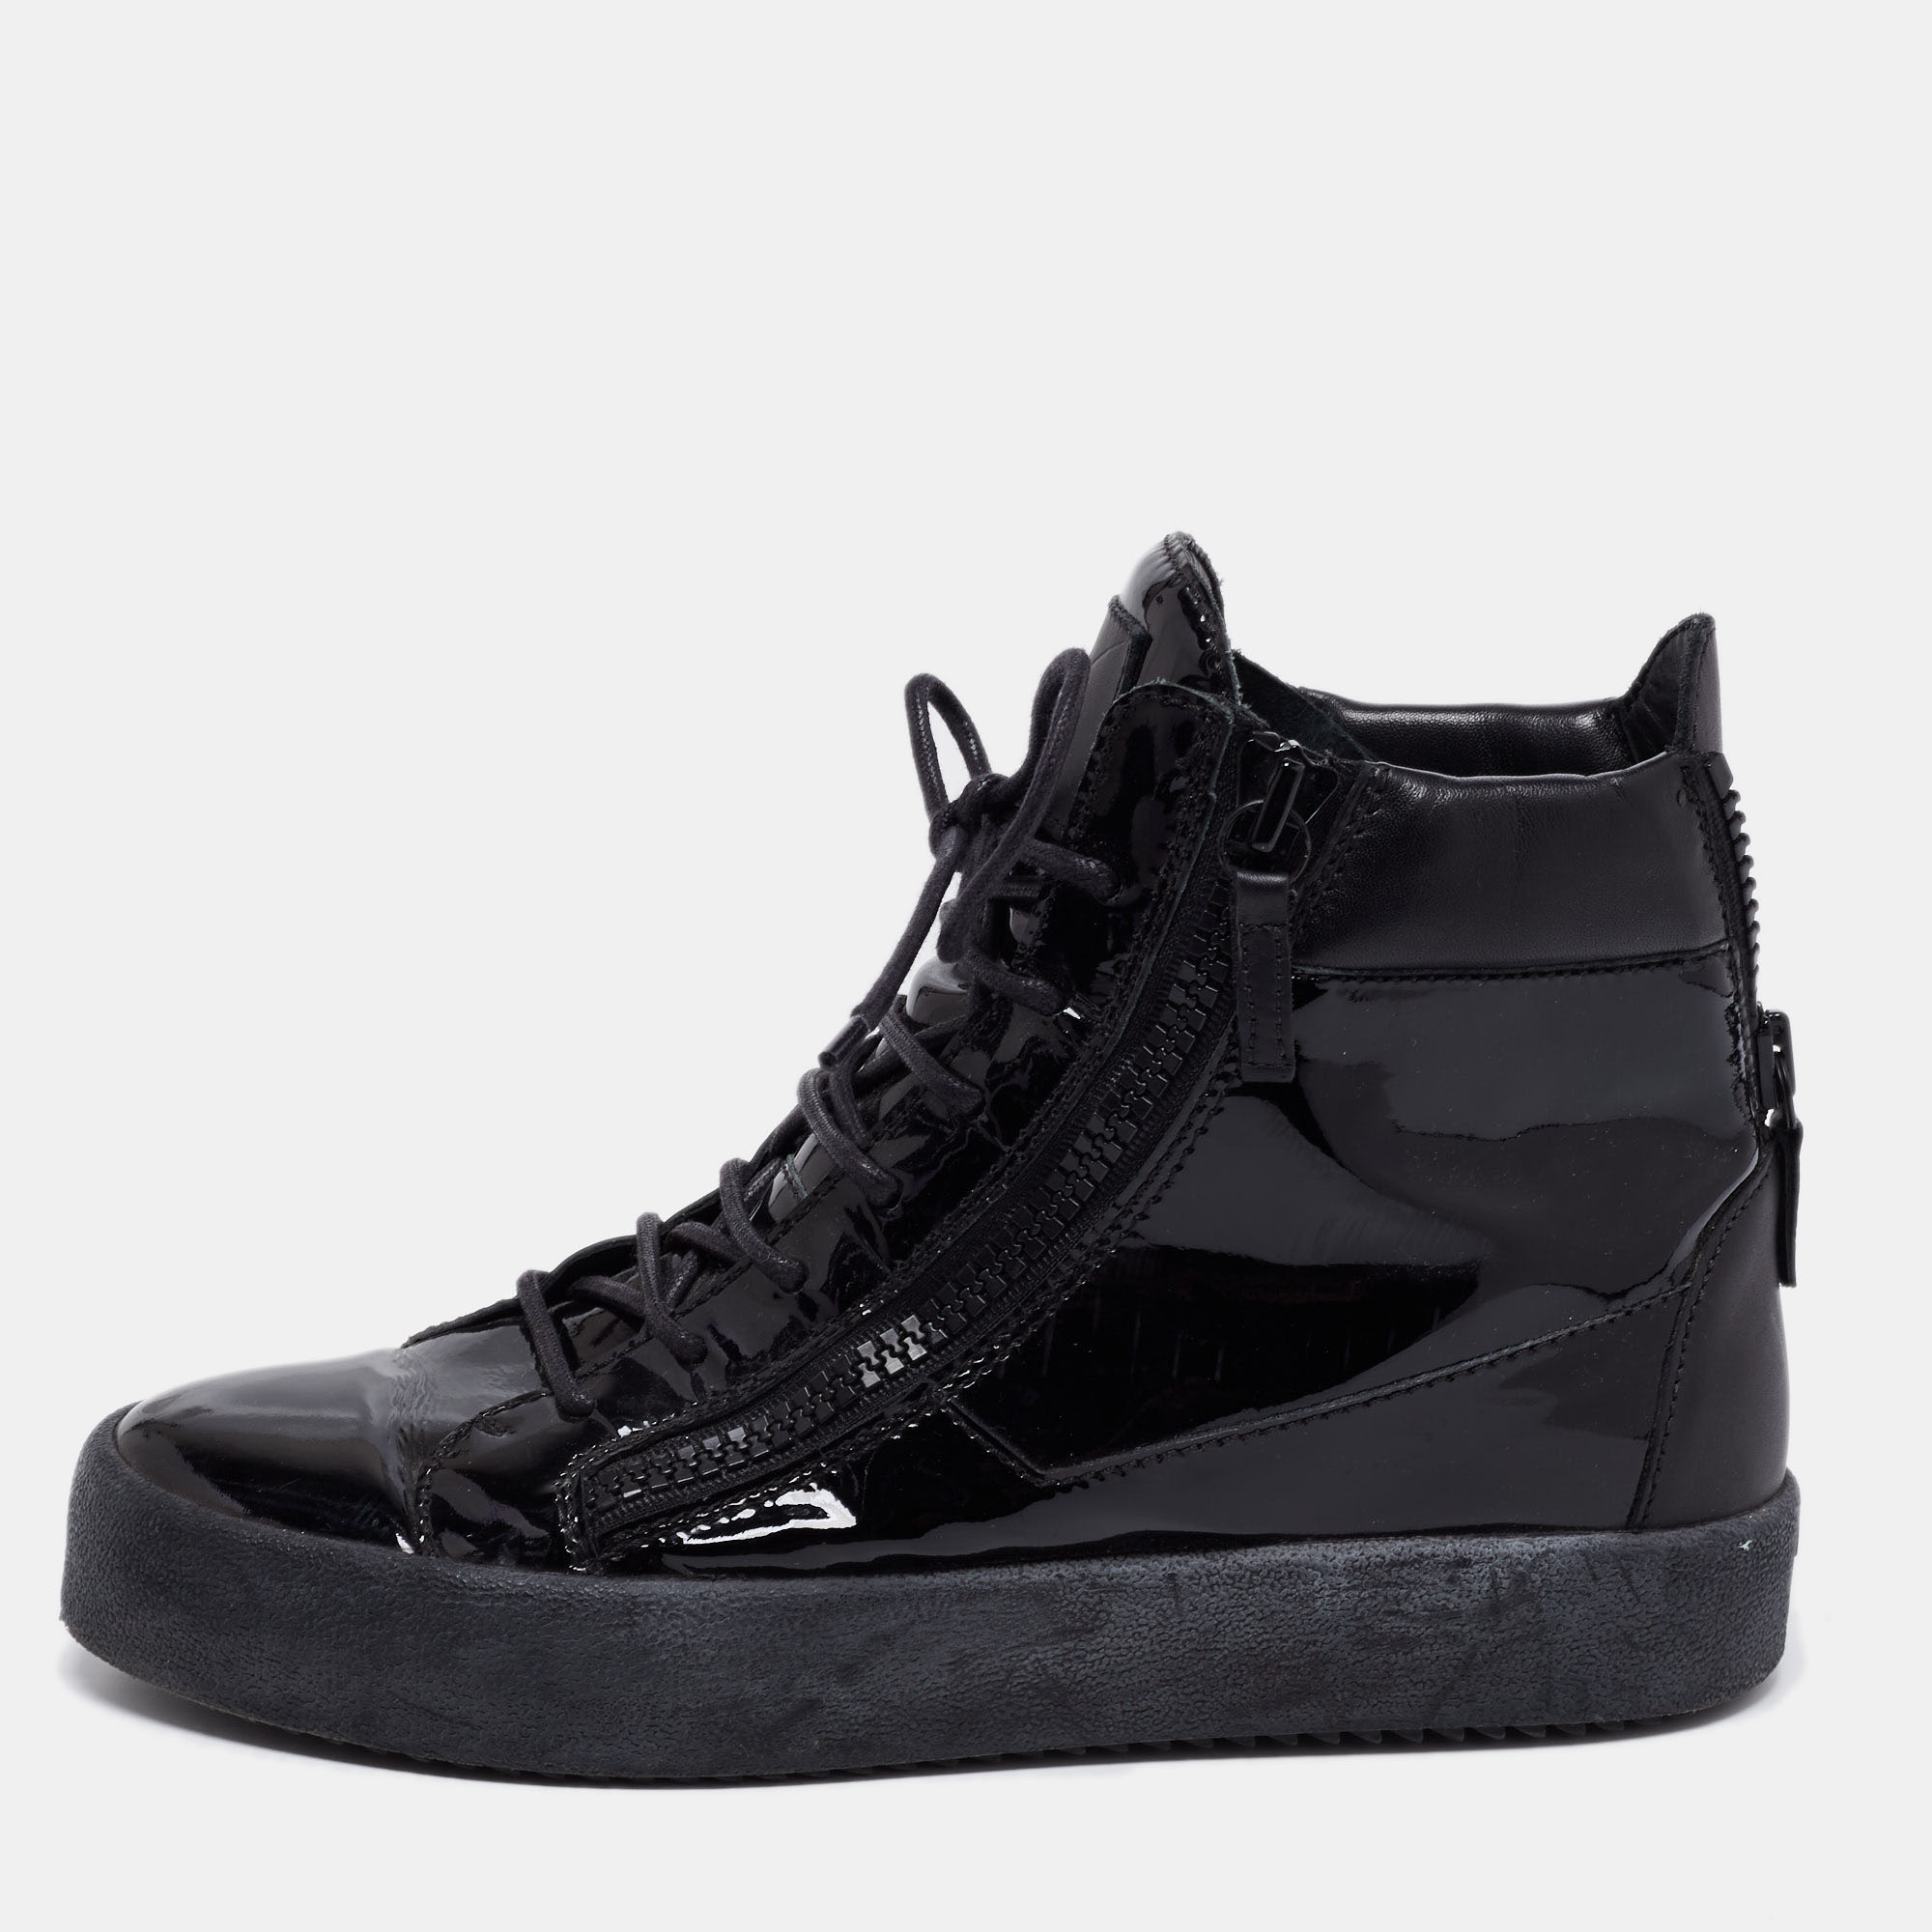 These Giuseppe Zanotti sneakers are meant to deliver a statement look. Crafted in Italy they are made of patent and leather and detailed with lace up fronts double zip detailing brand detail on the tongue leather lining and tonal rubber soles.